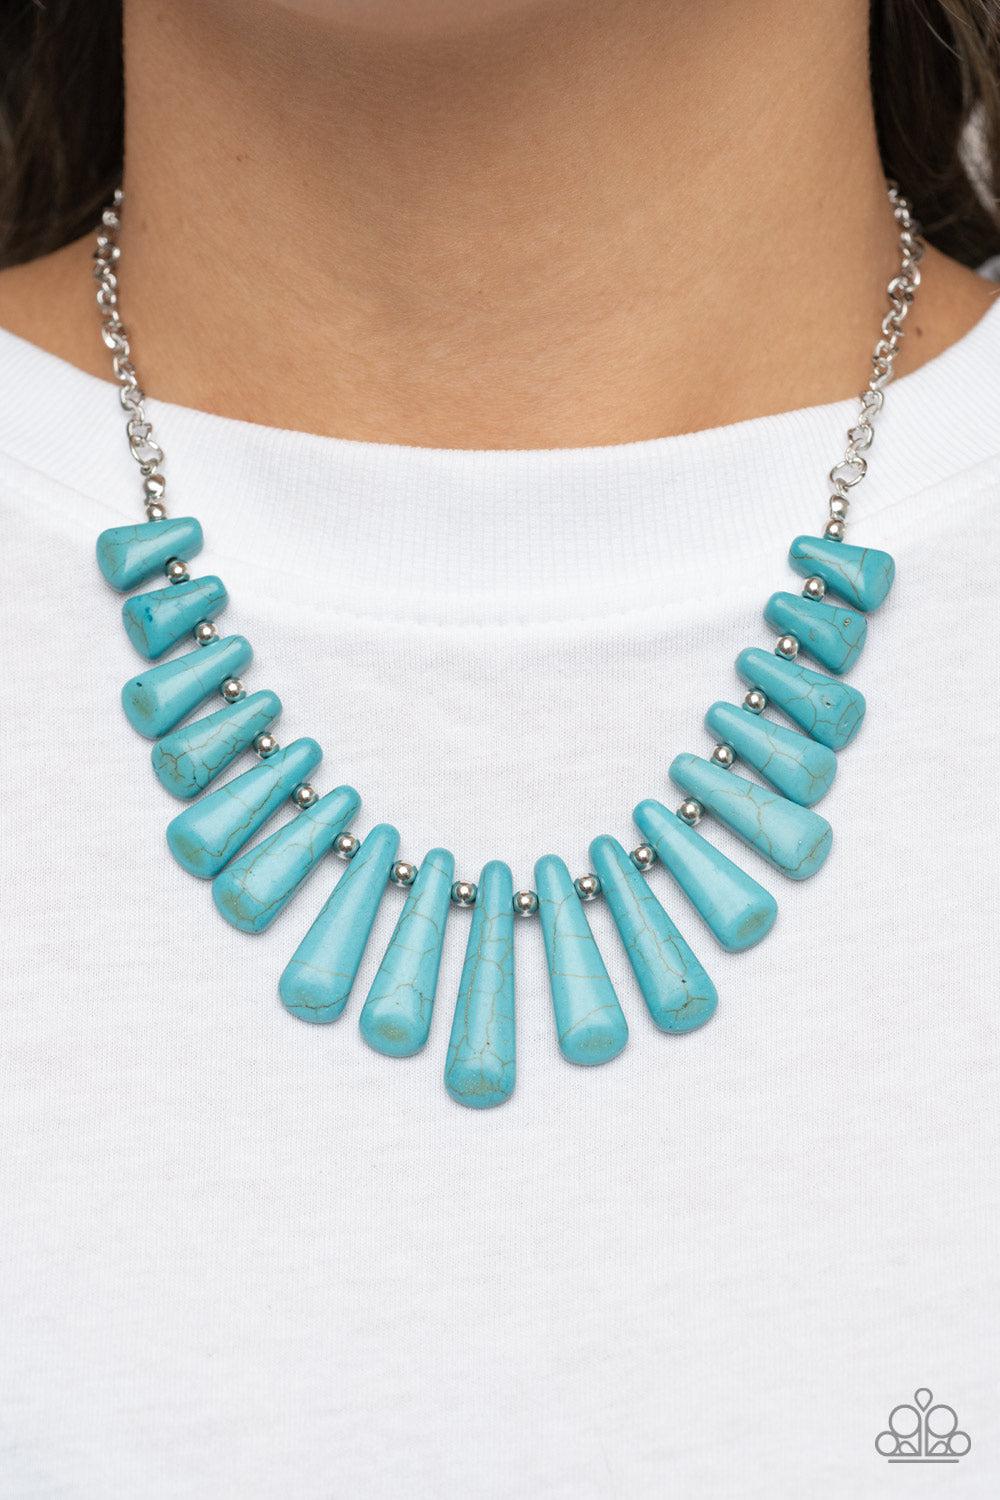 Mojave Empress Turquoise Blue Stone Necklace - Paparazzi Accessories-on model - CarasShop.com - $5 Jewelry by Cara Jewels